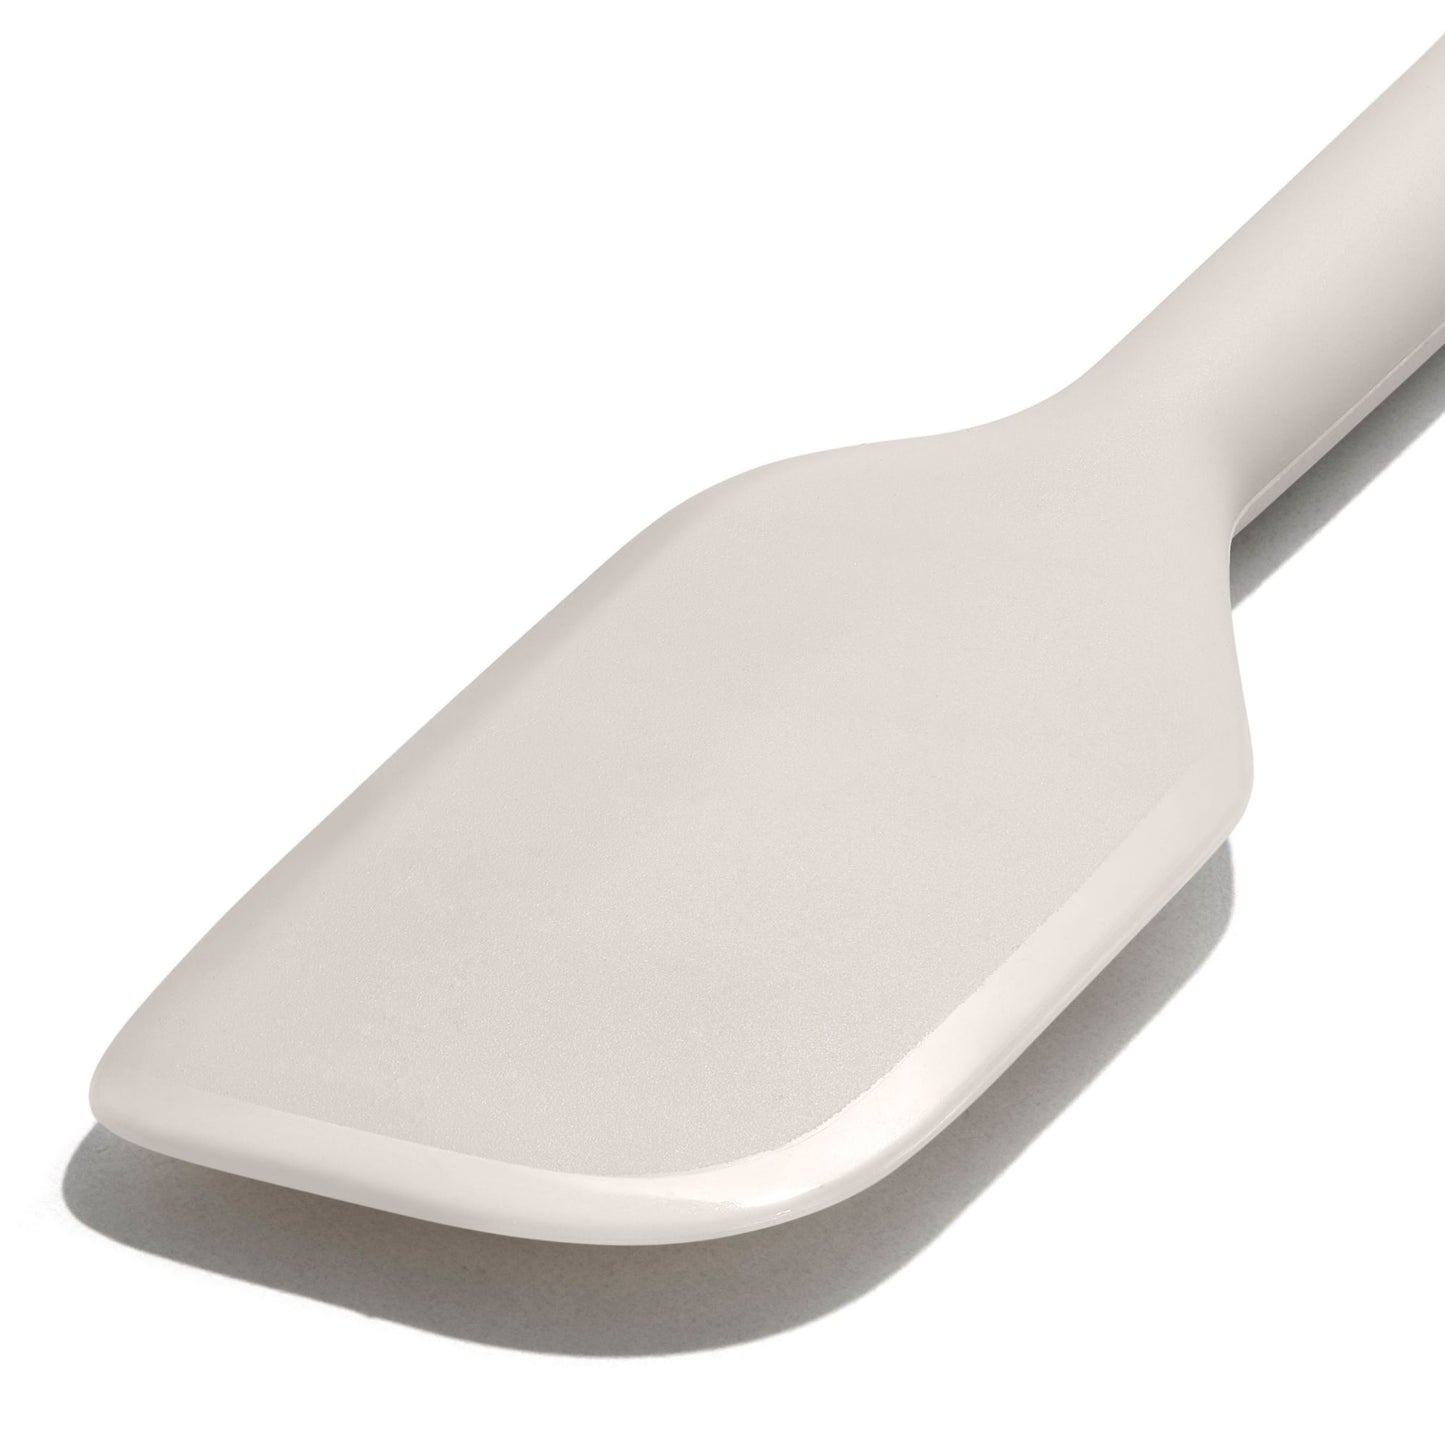 new OXO Small silicone spatula. 9.5 inch total length. Off white